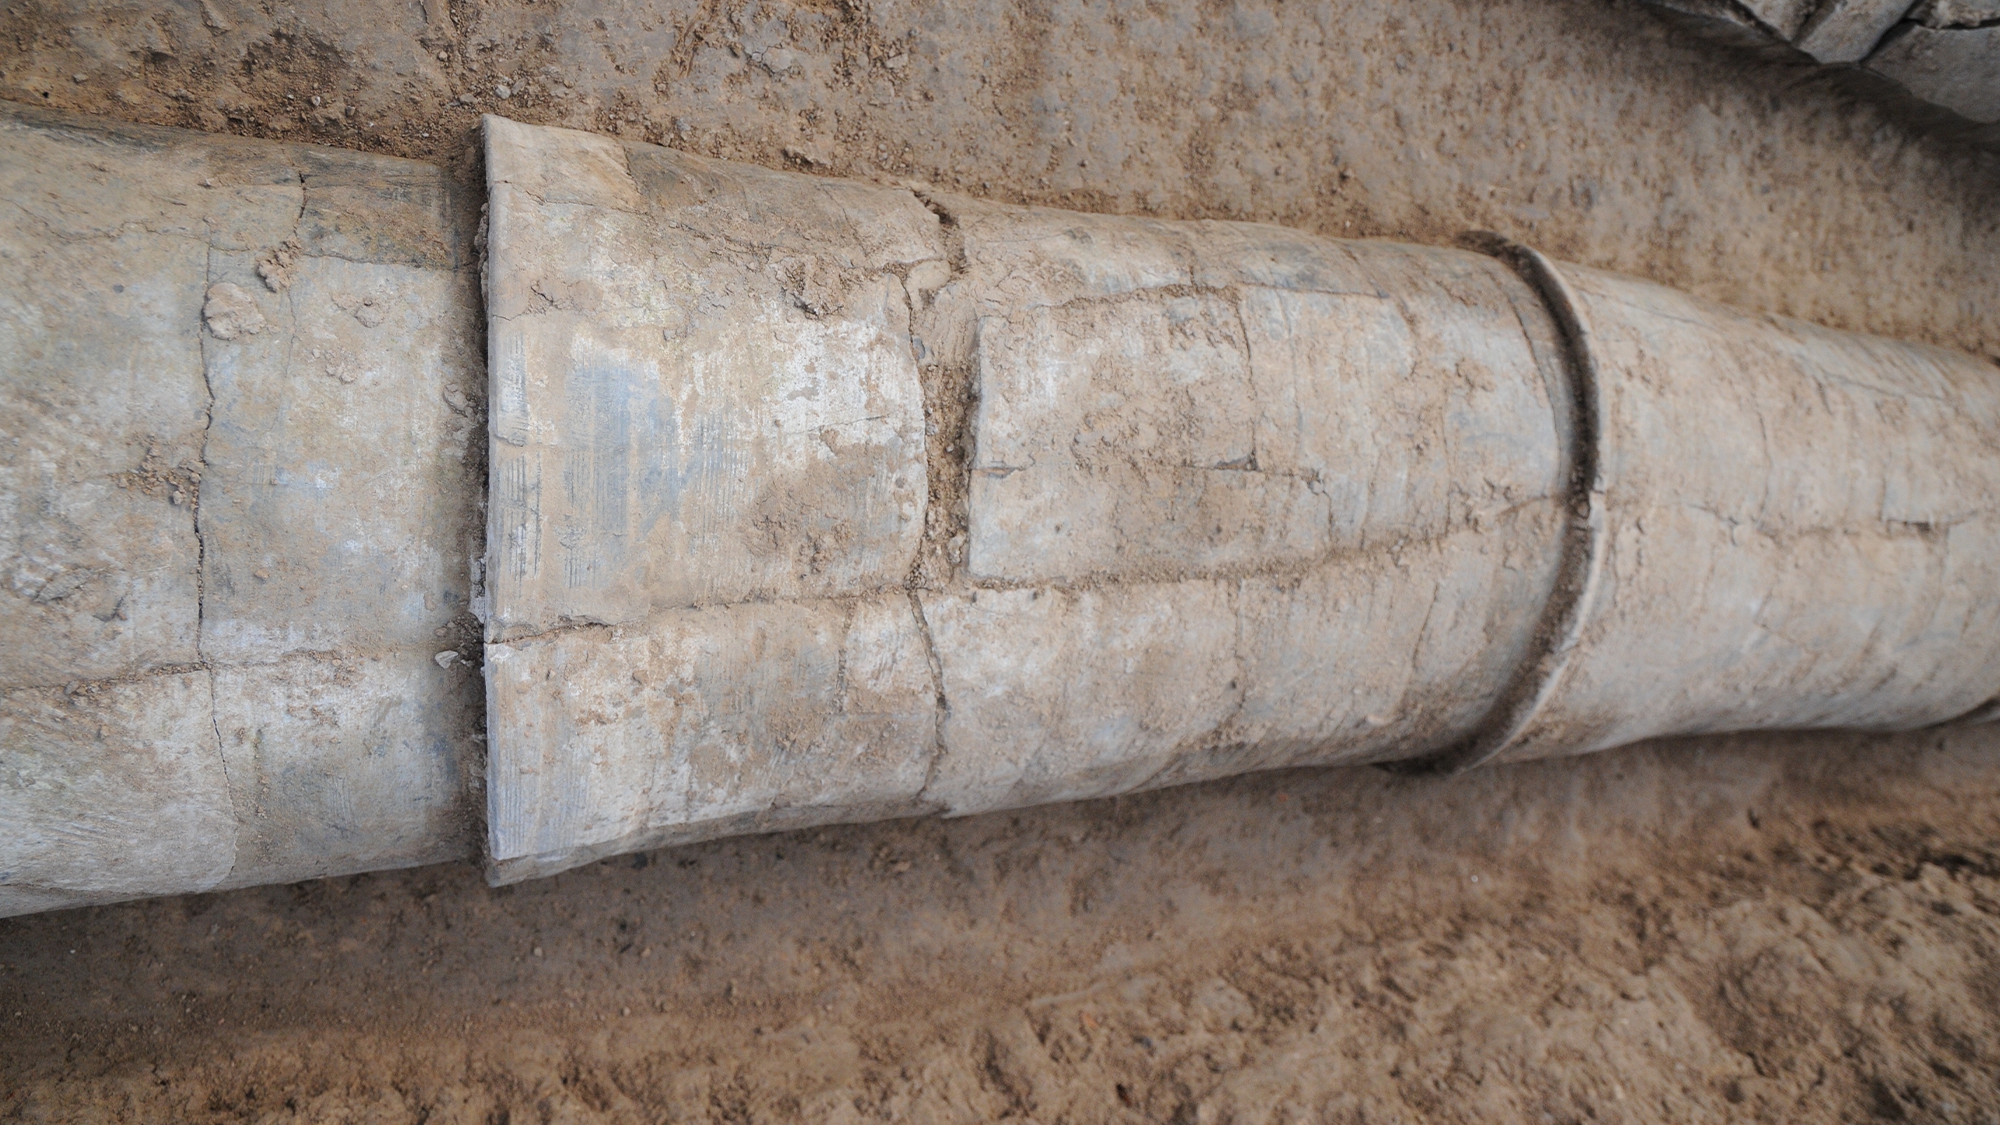 Ceramic pipes kept this town from flooding during monsoons 4,000 years ago